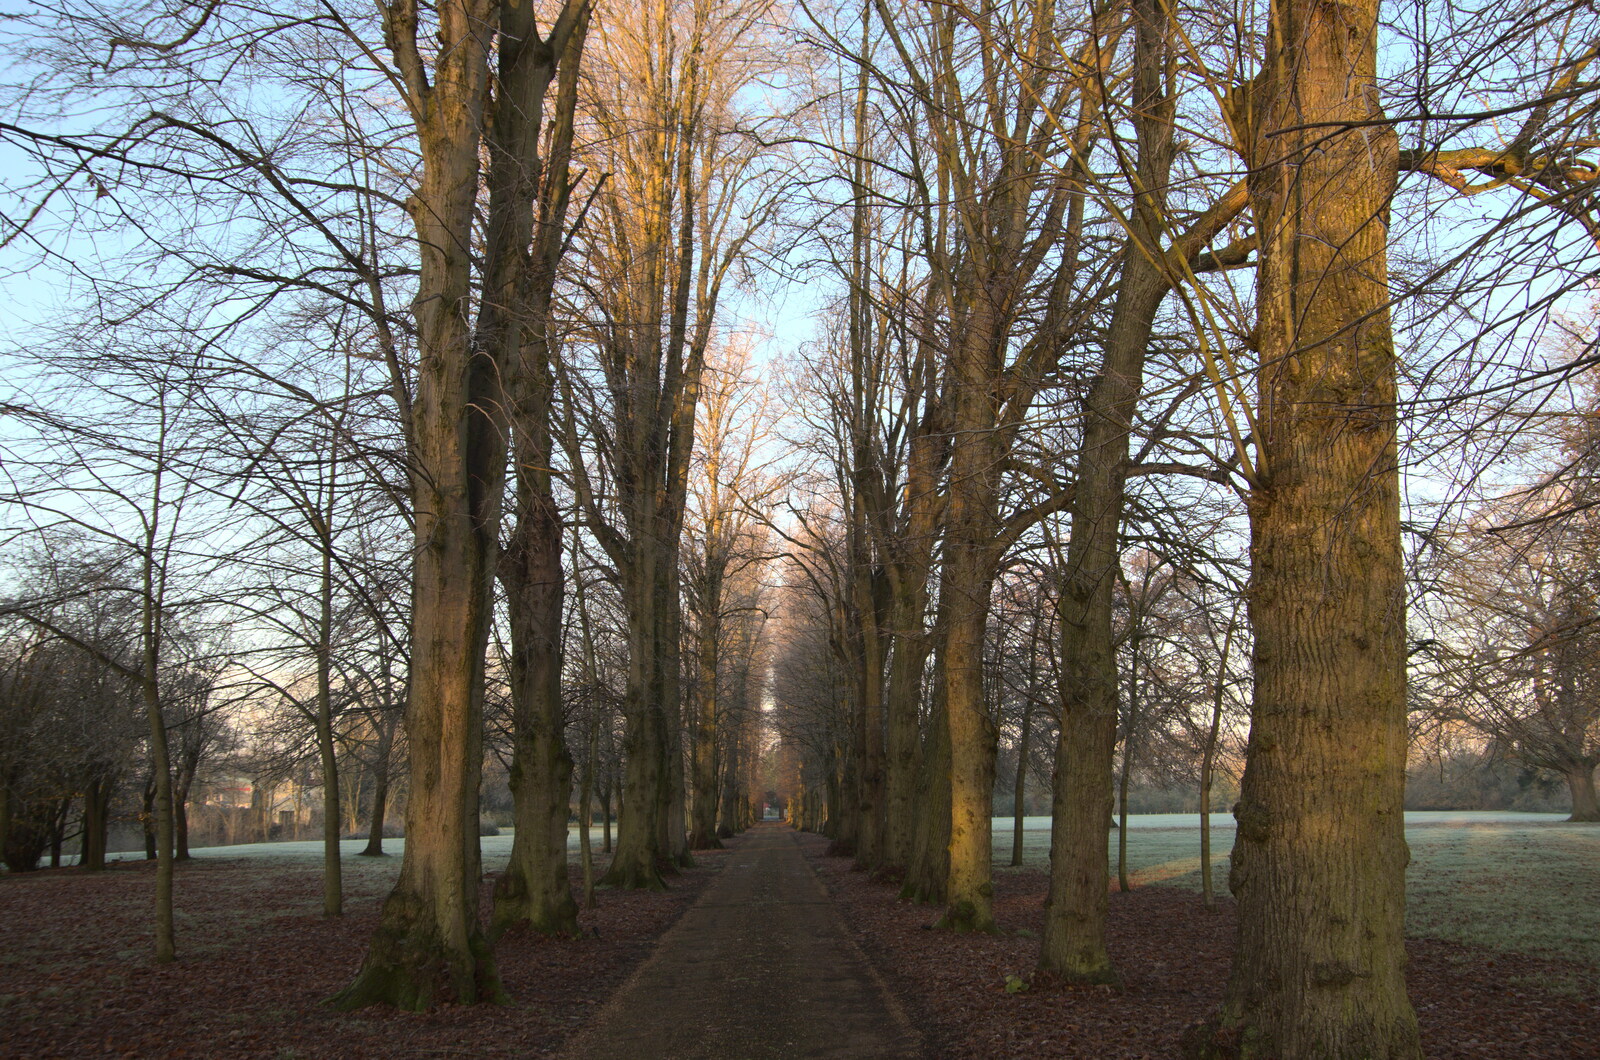 The Oaksmere's avenue trees are bare from A Return to the Oaksmere, Brome, Suffolk - 8th December 2020